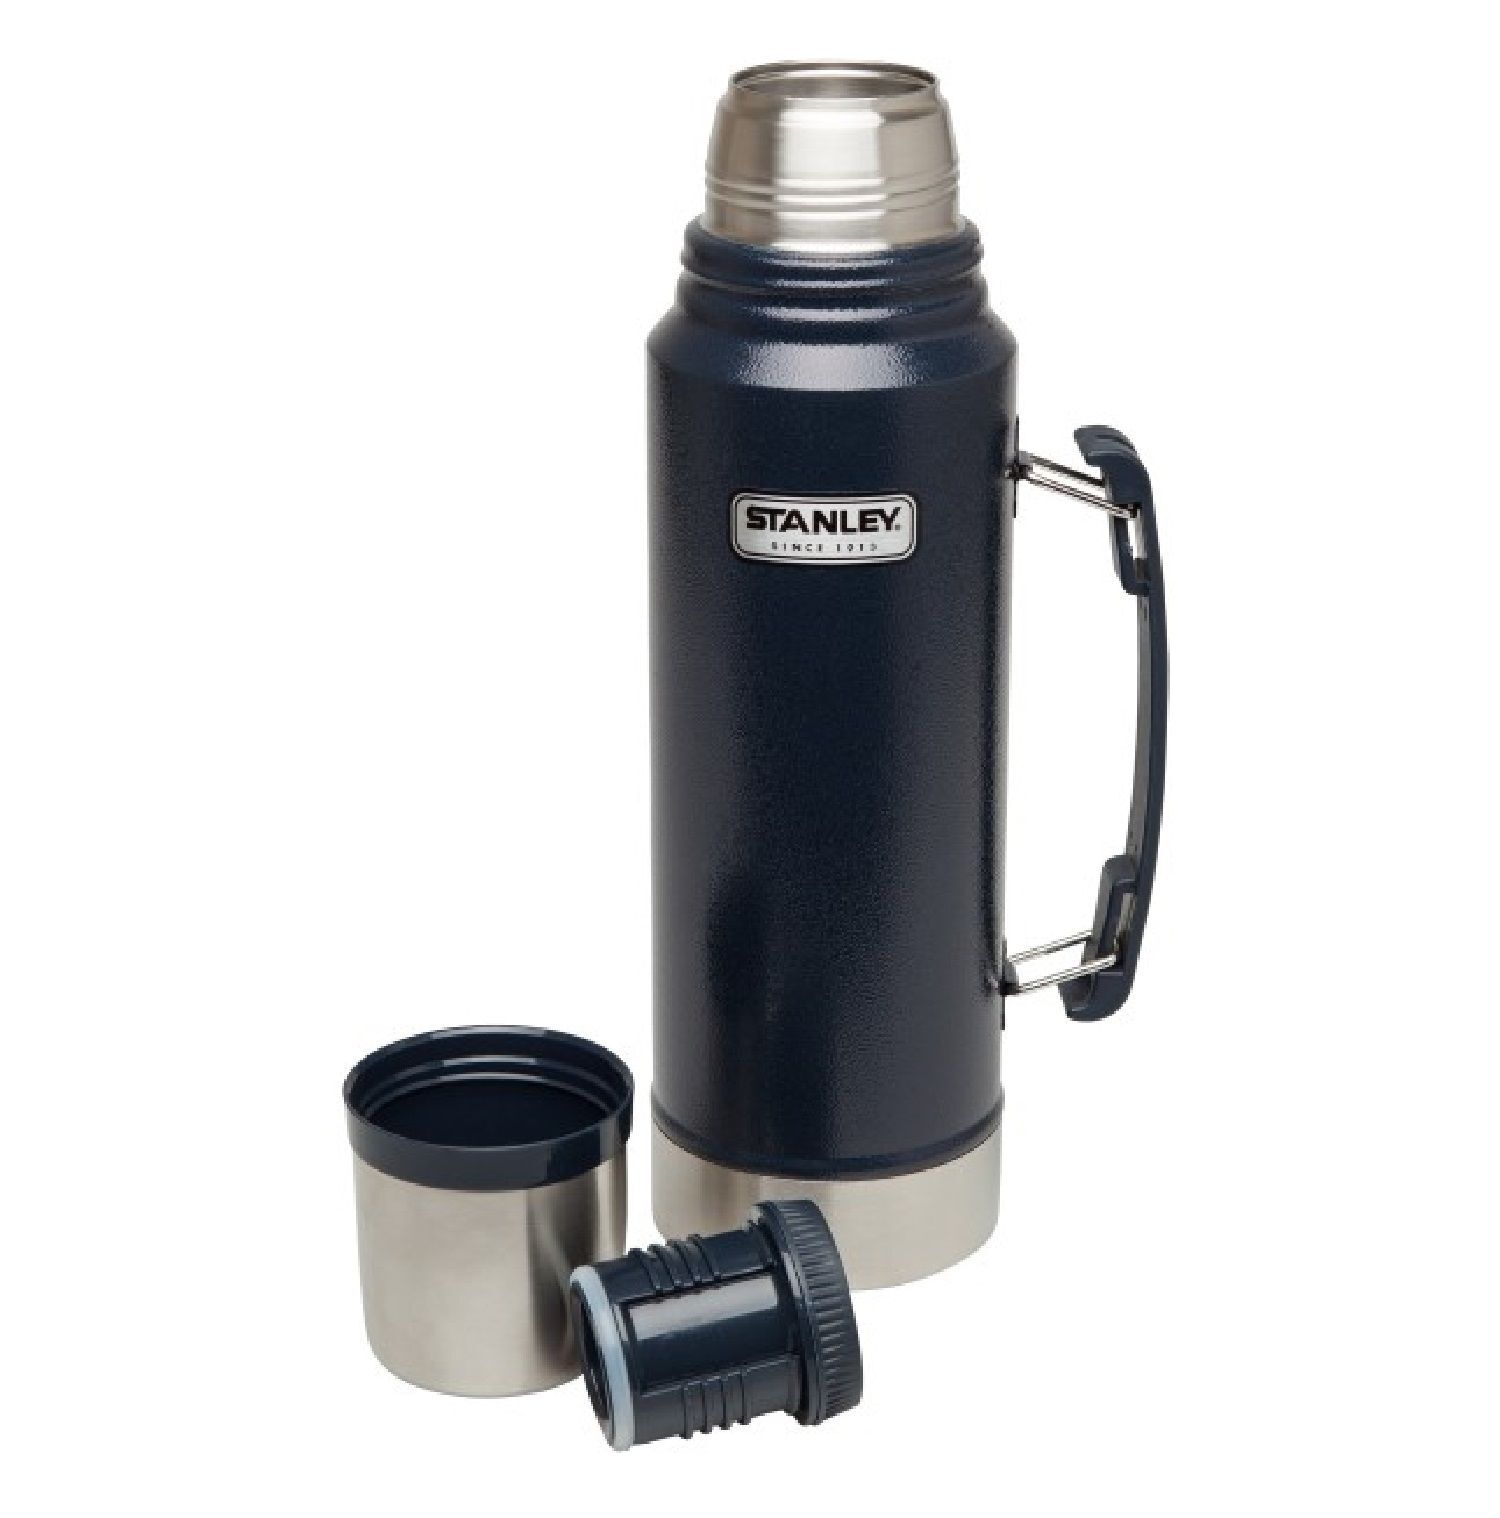 NEW STANLEY 1 Litre CLASSIC VACUUM BOTTLE Thermos Flask Stainless Steel Stanley Stainless Steel Vacuum/thermos Bottles